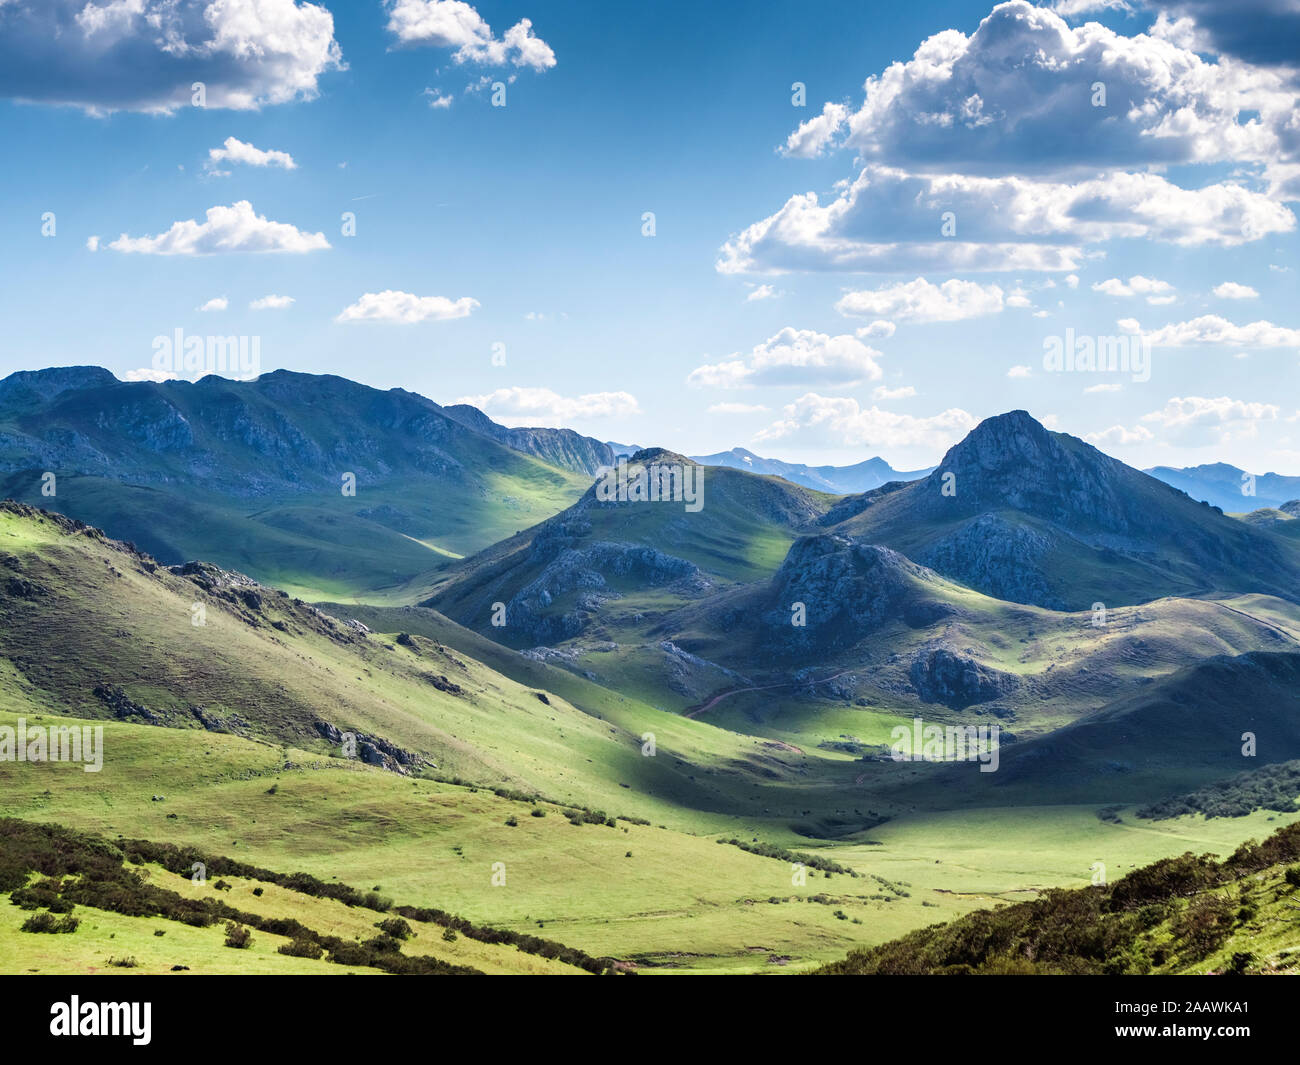 Scenic view of landscape against sky during sunny day, Asturias, Spain Stock Photo